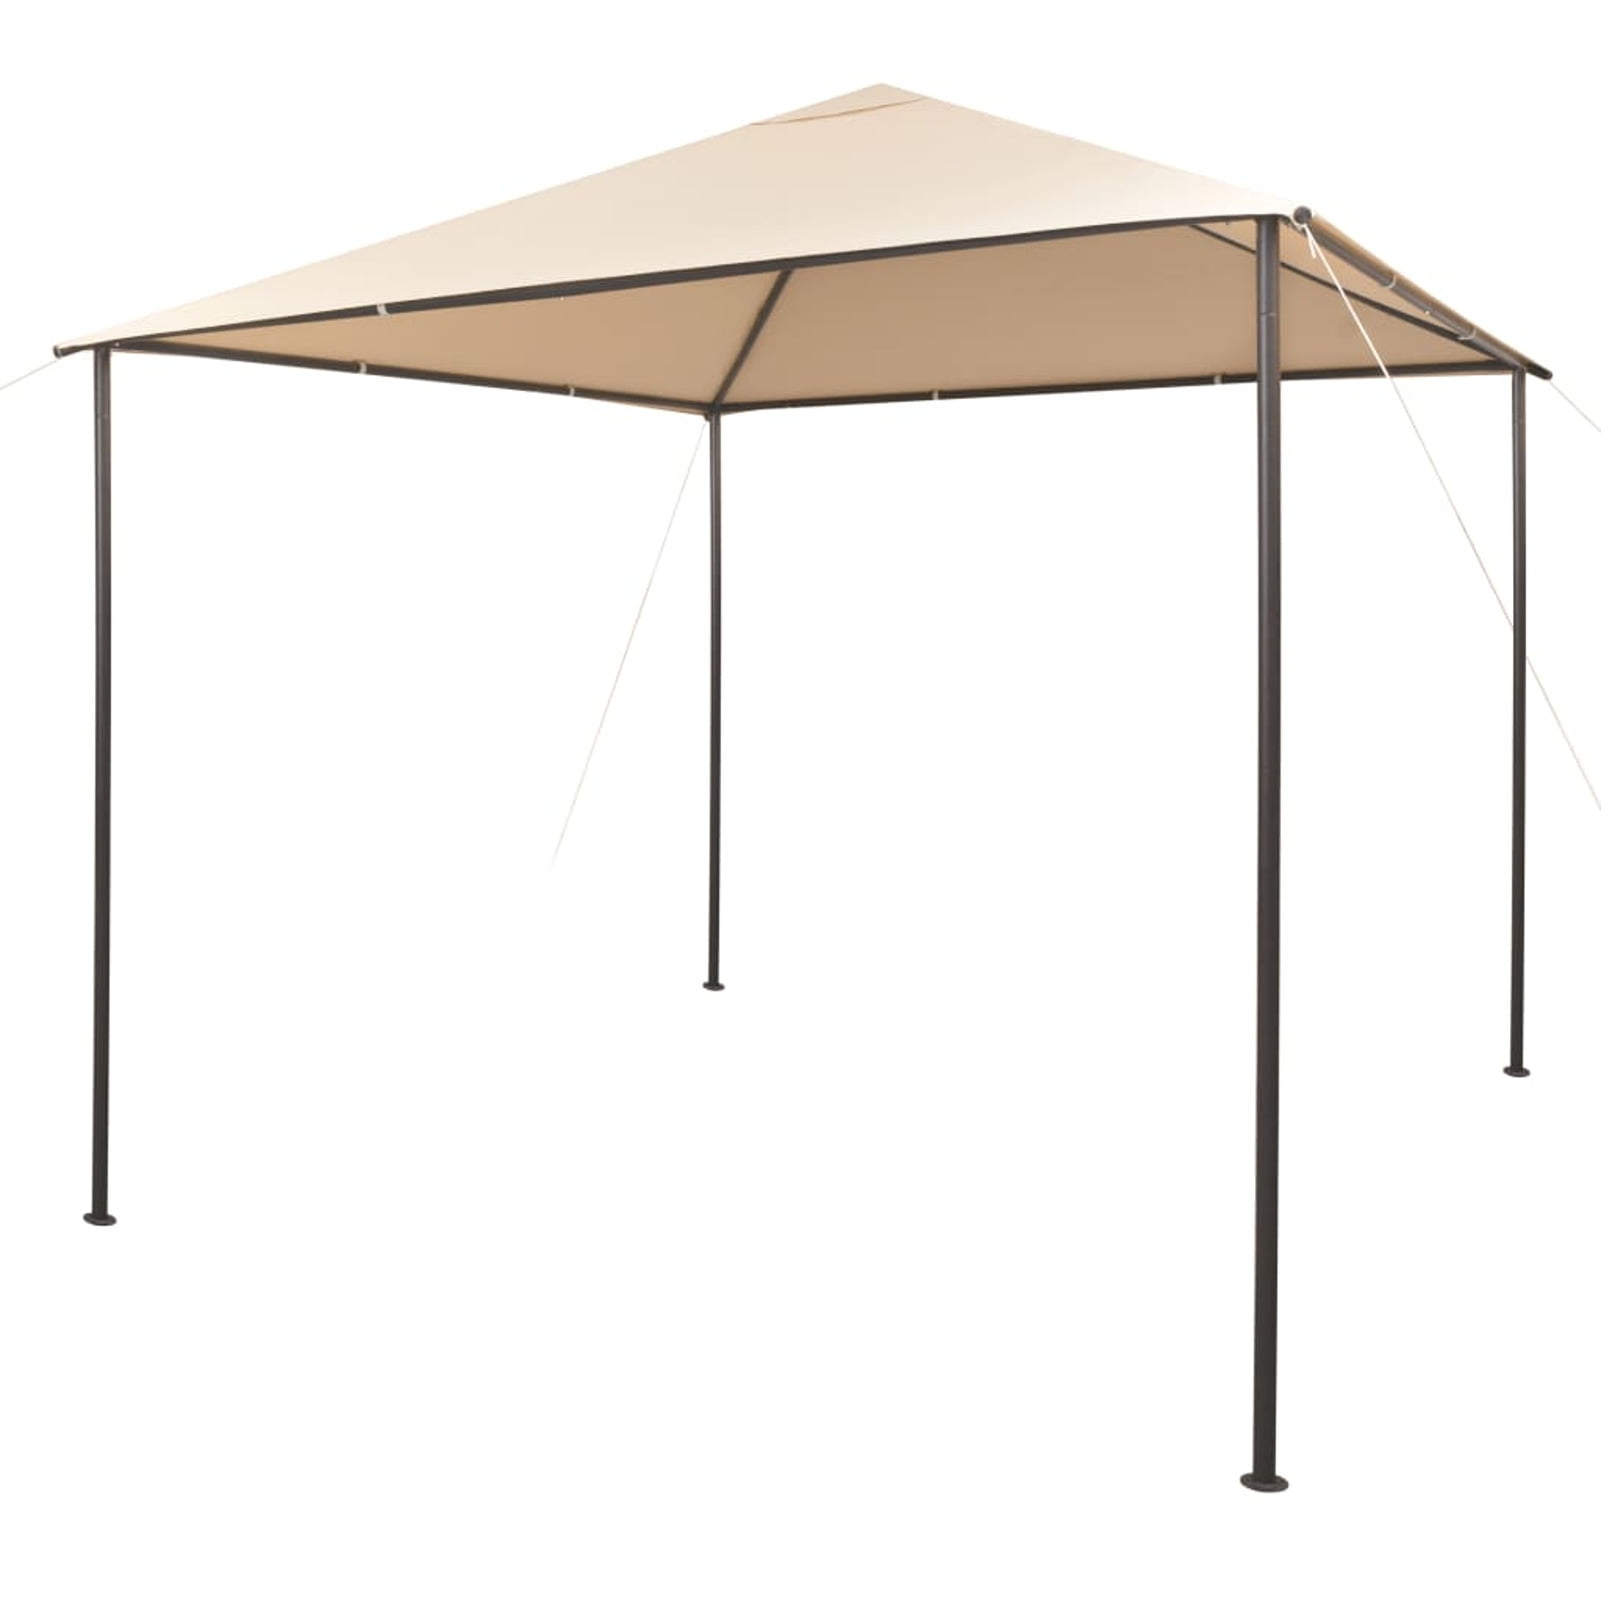 Details about   118.1"x118.1" Party Tent Roof Canopy Gazebo Replacement Cover 3 Colors Outdoor 